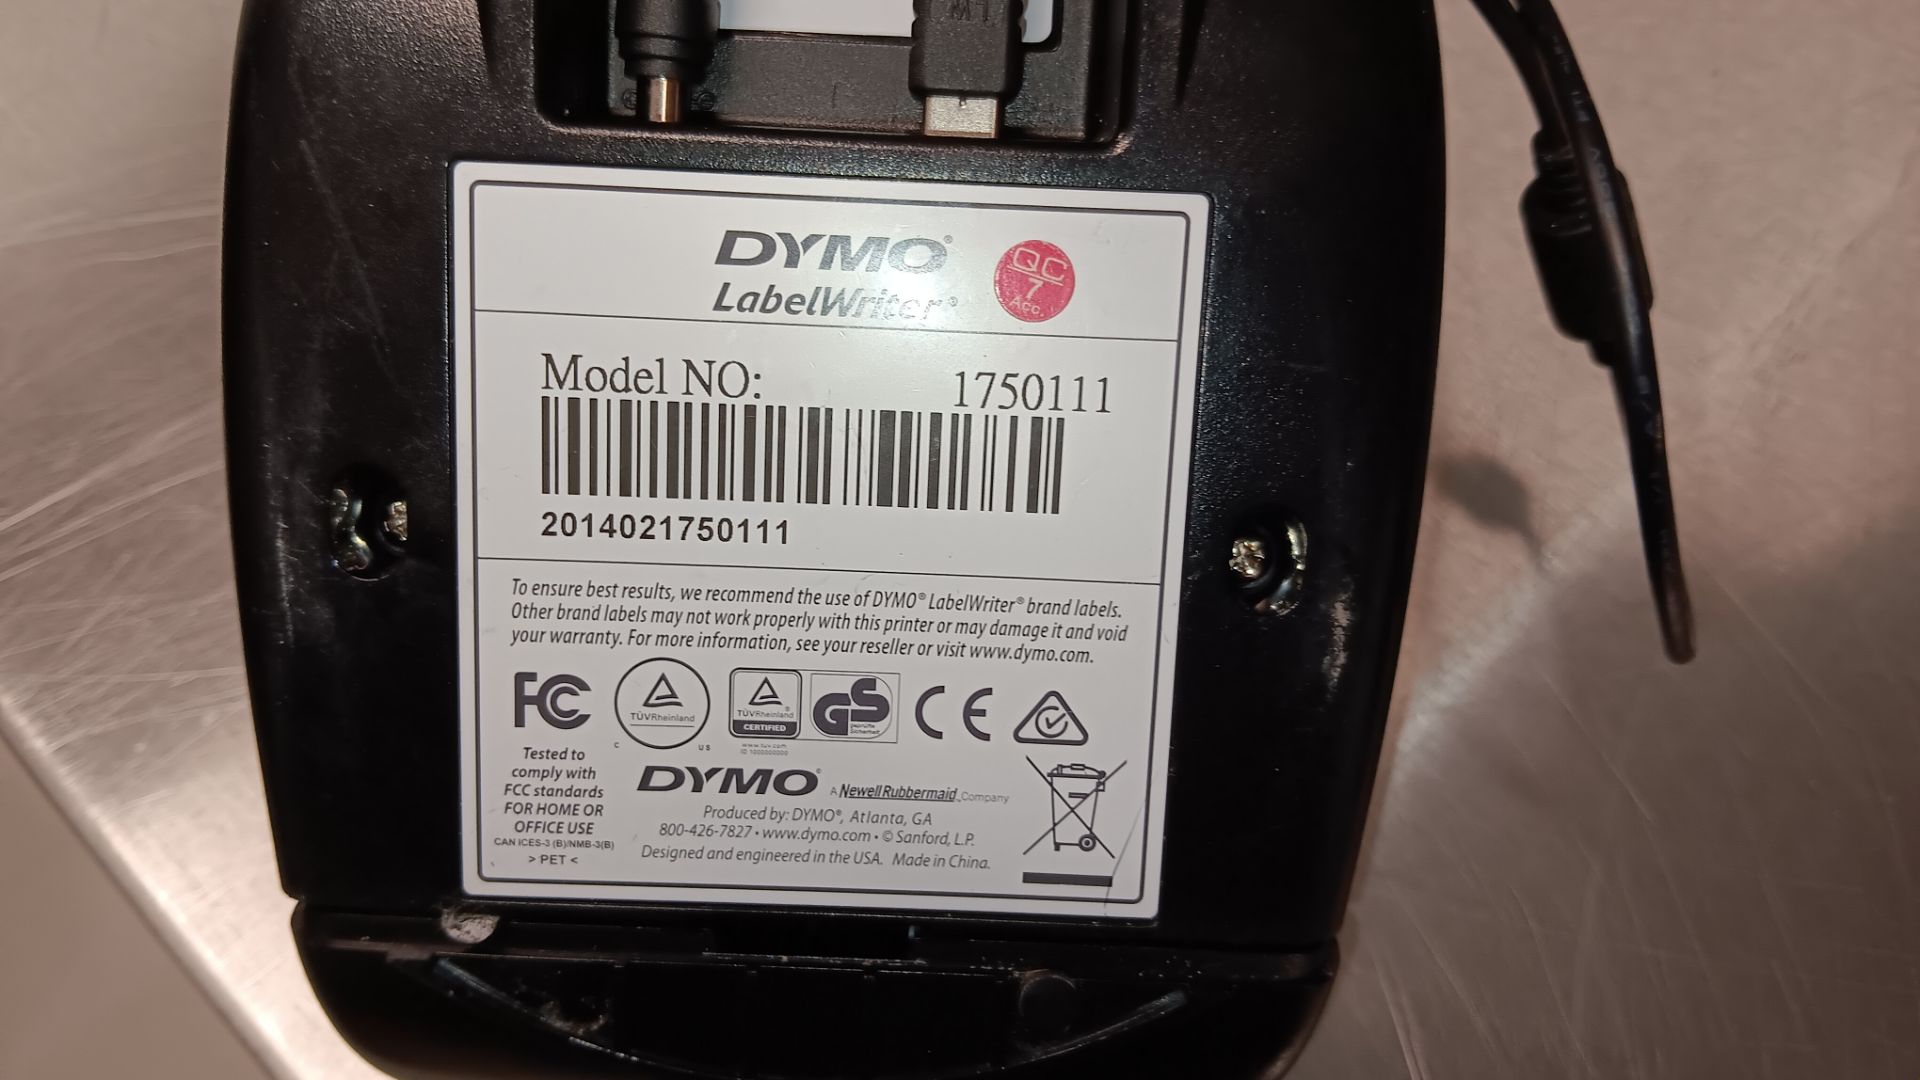 Dymo 175011 Label Writer 450, serial number 2014021750111 and Star Micronics TSP100 - Image 2 of 3